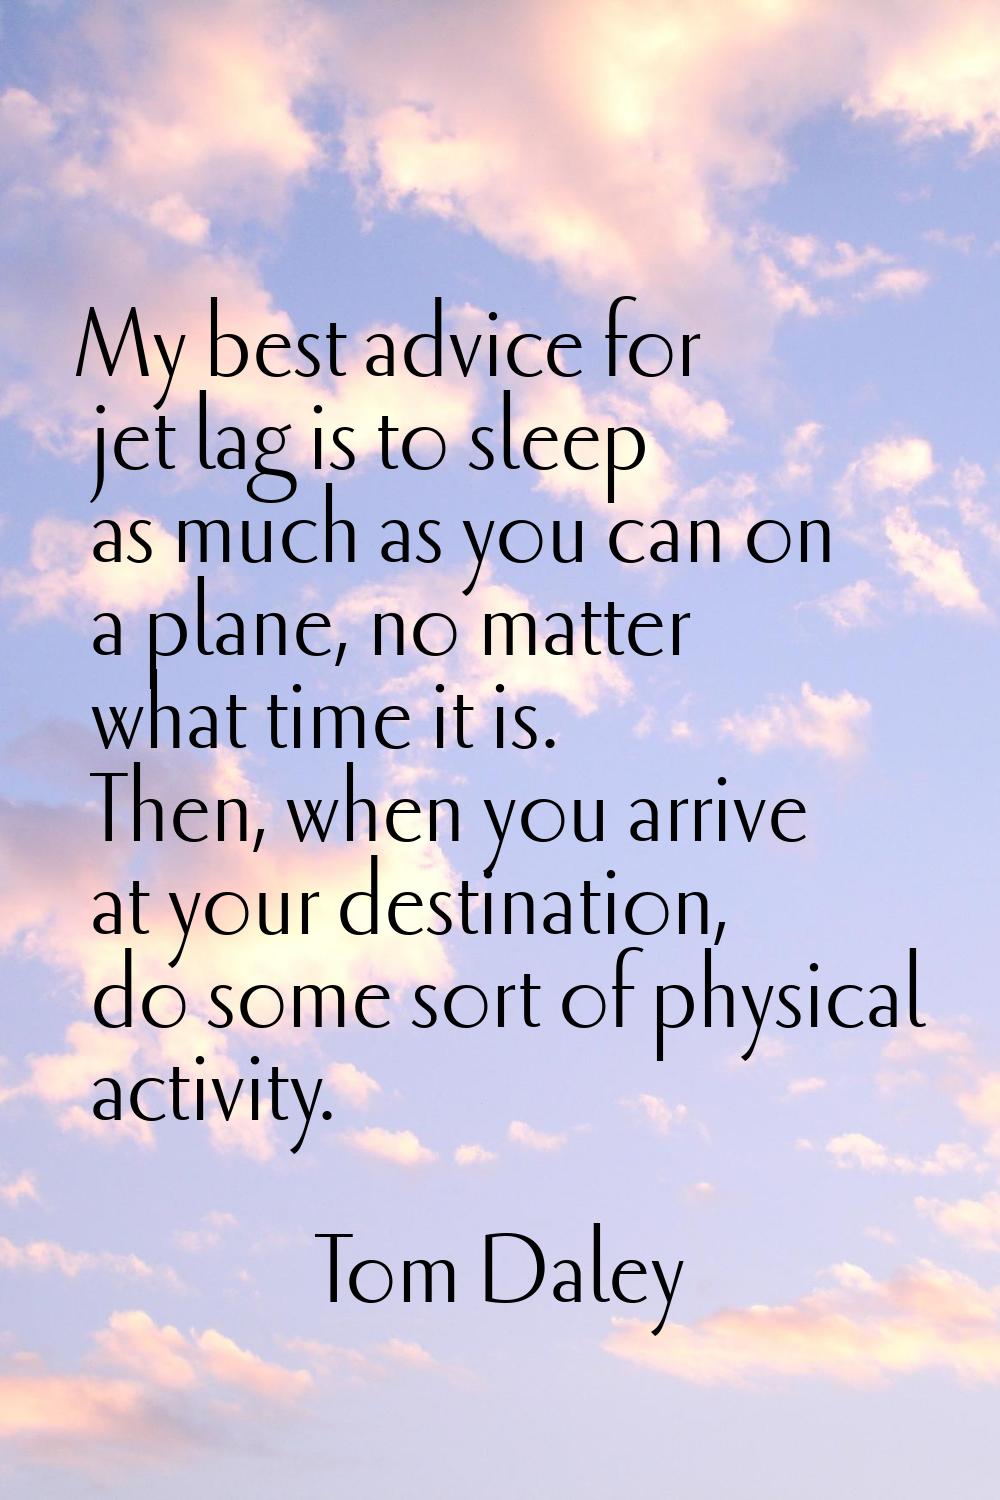 My best advice for jet lag is to sleep as much as you can on a plane, no matter what time it is. Th